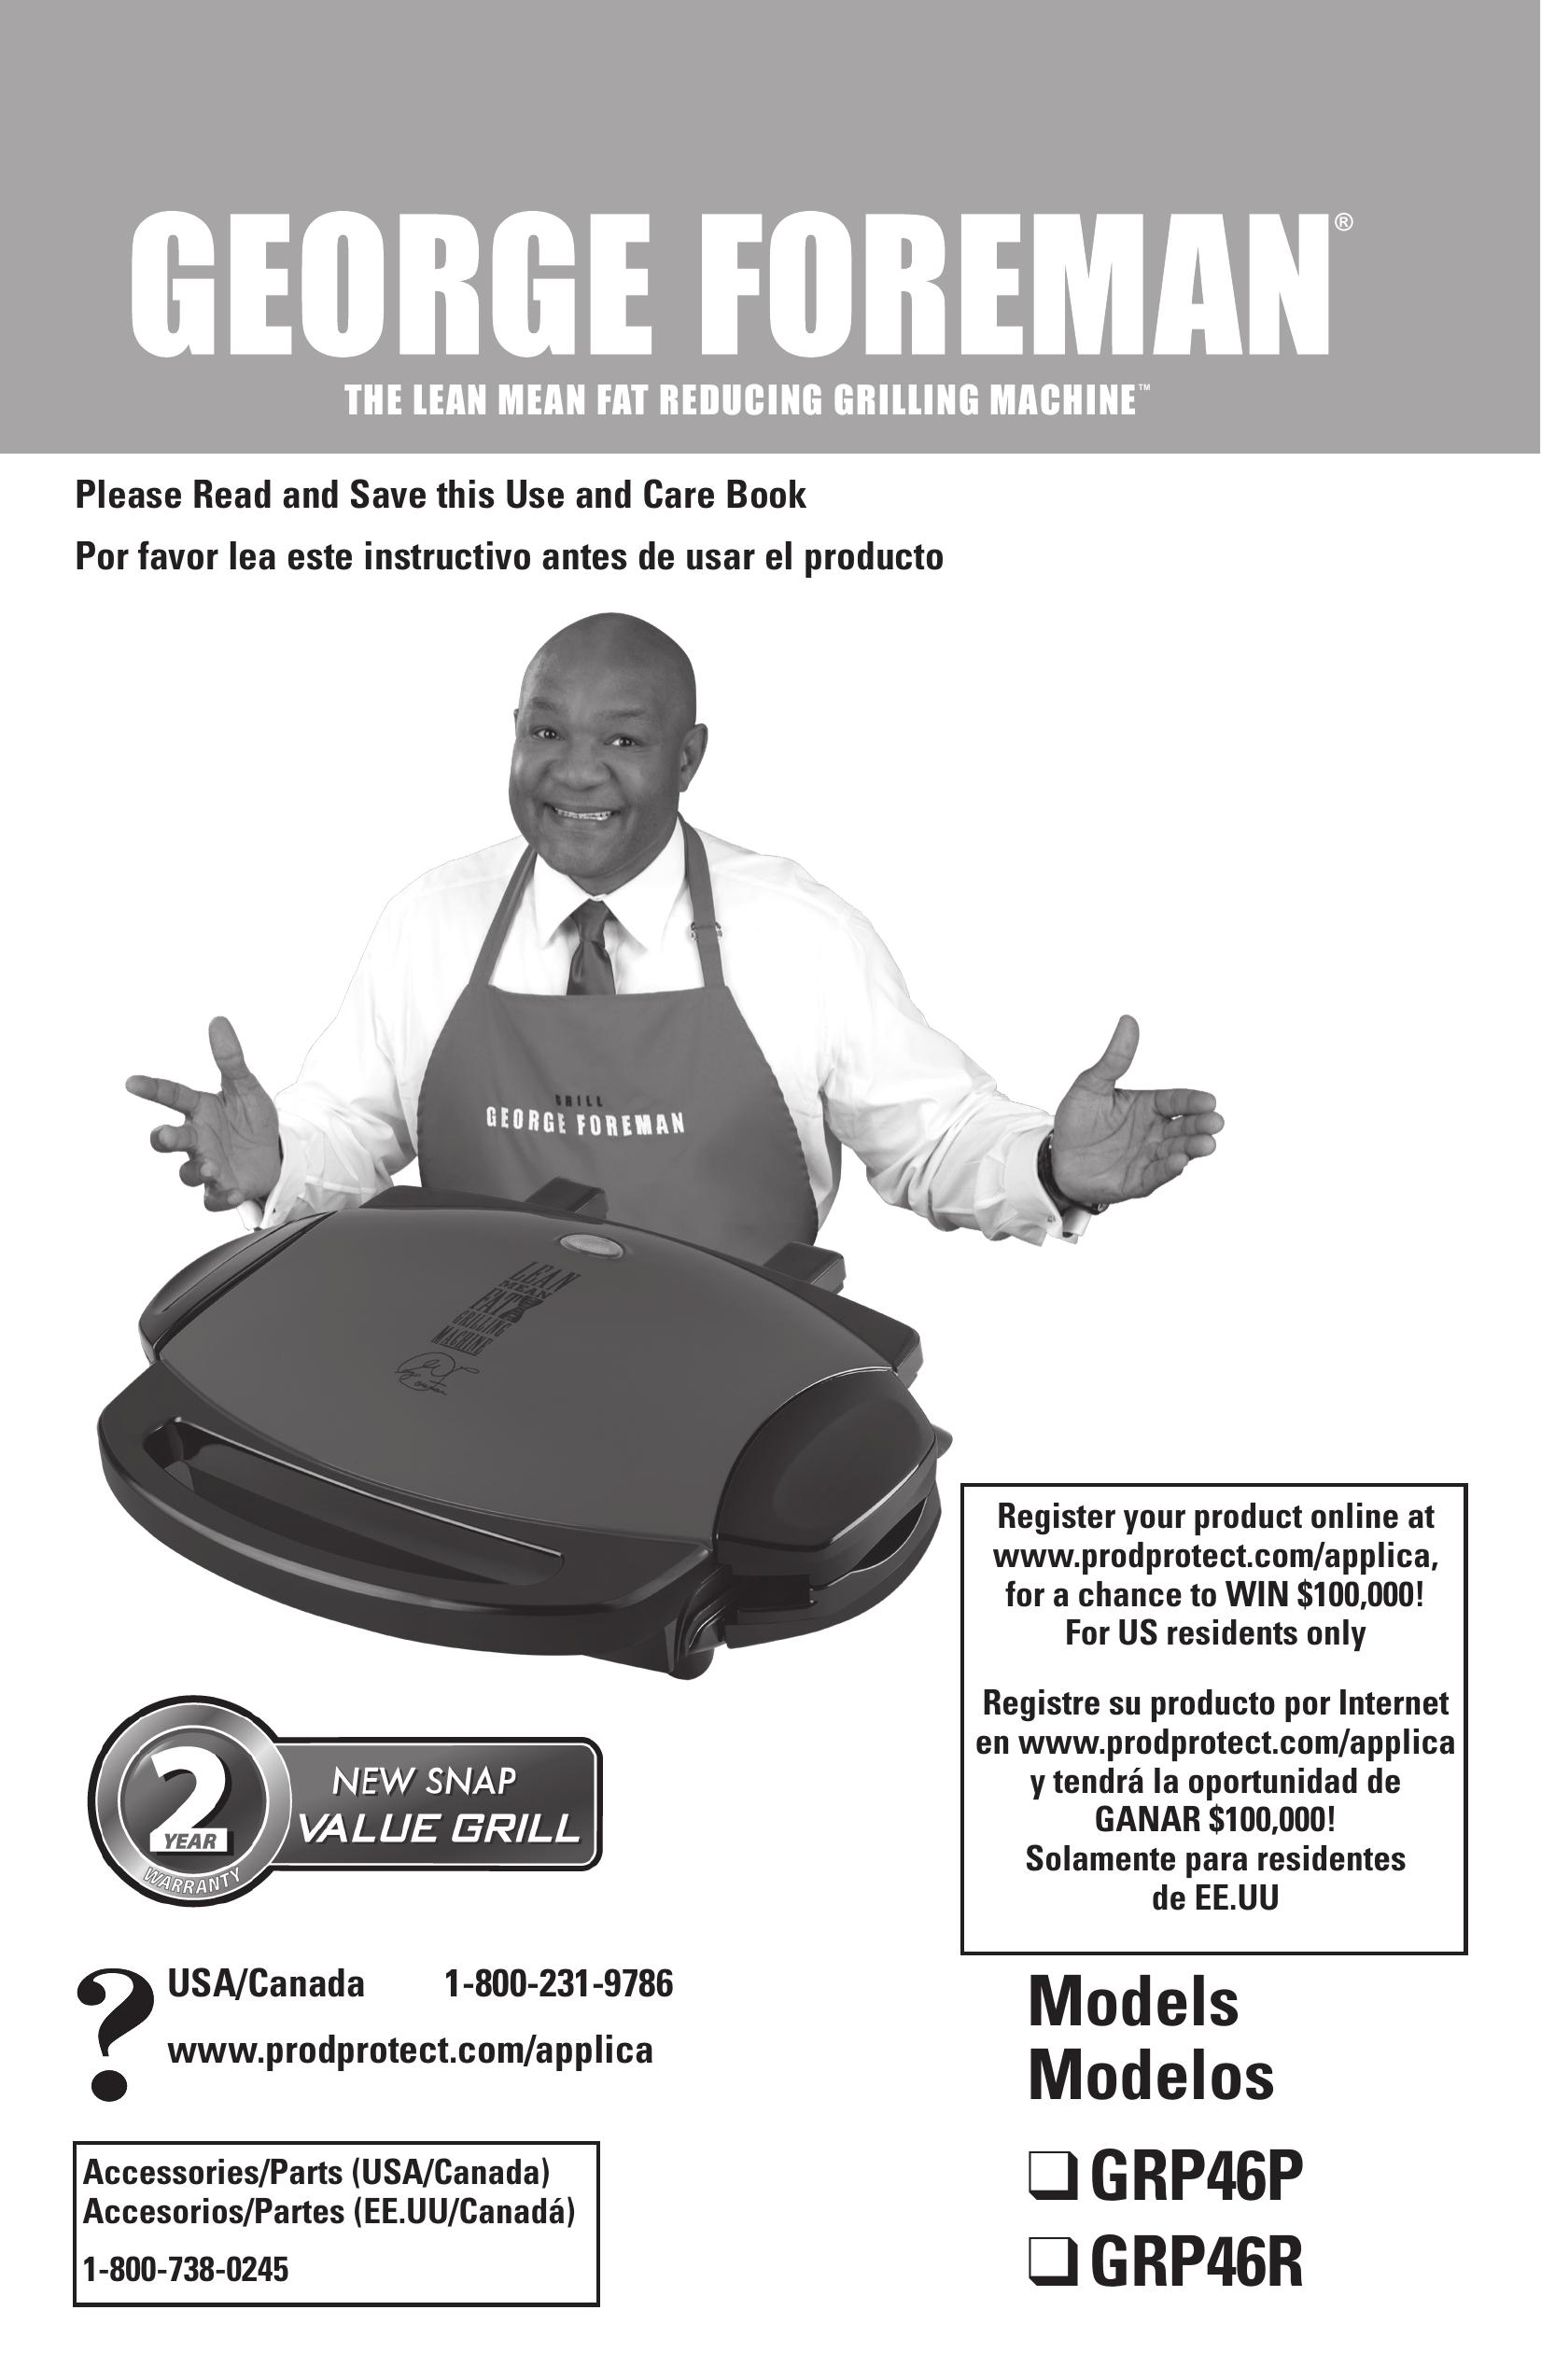 George Foreman GRP46R Electric Grill User Manual